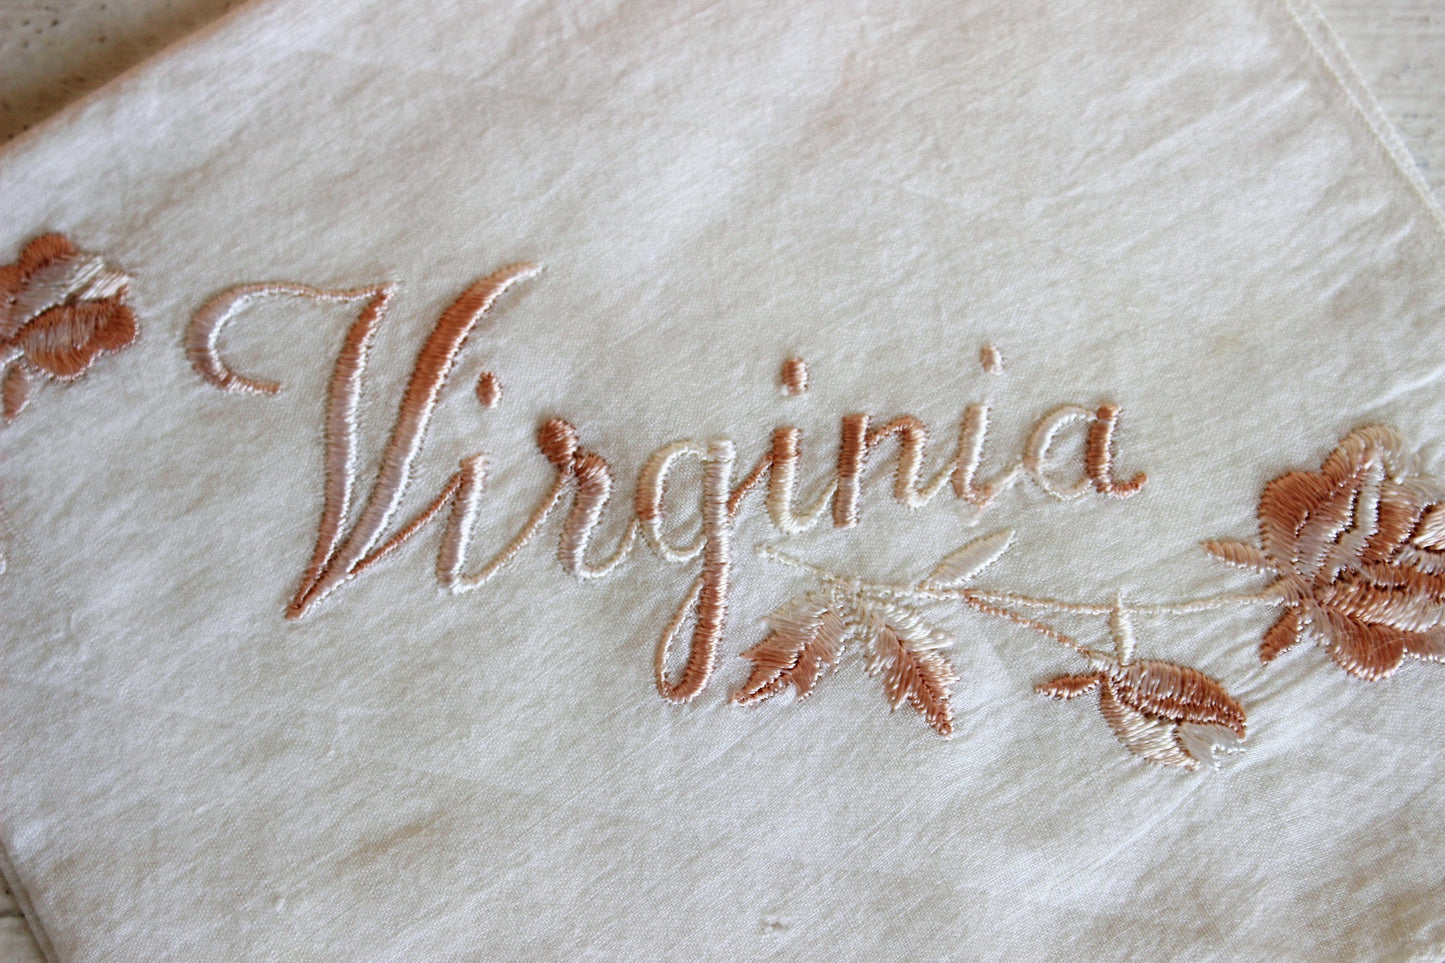 Vintage Handkerchief With Embroidered Virginia